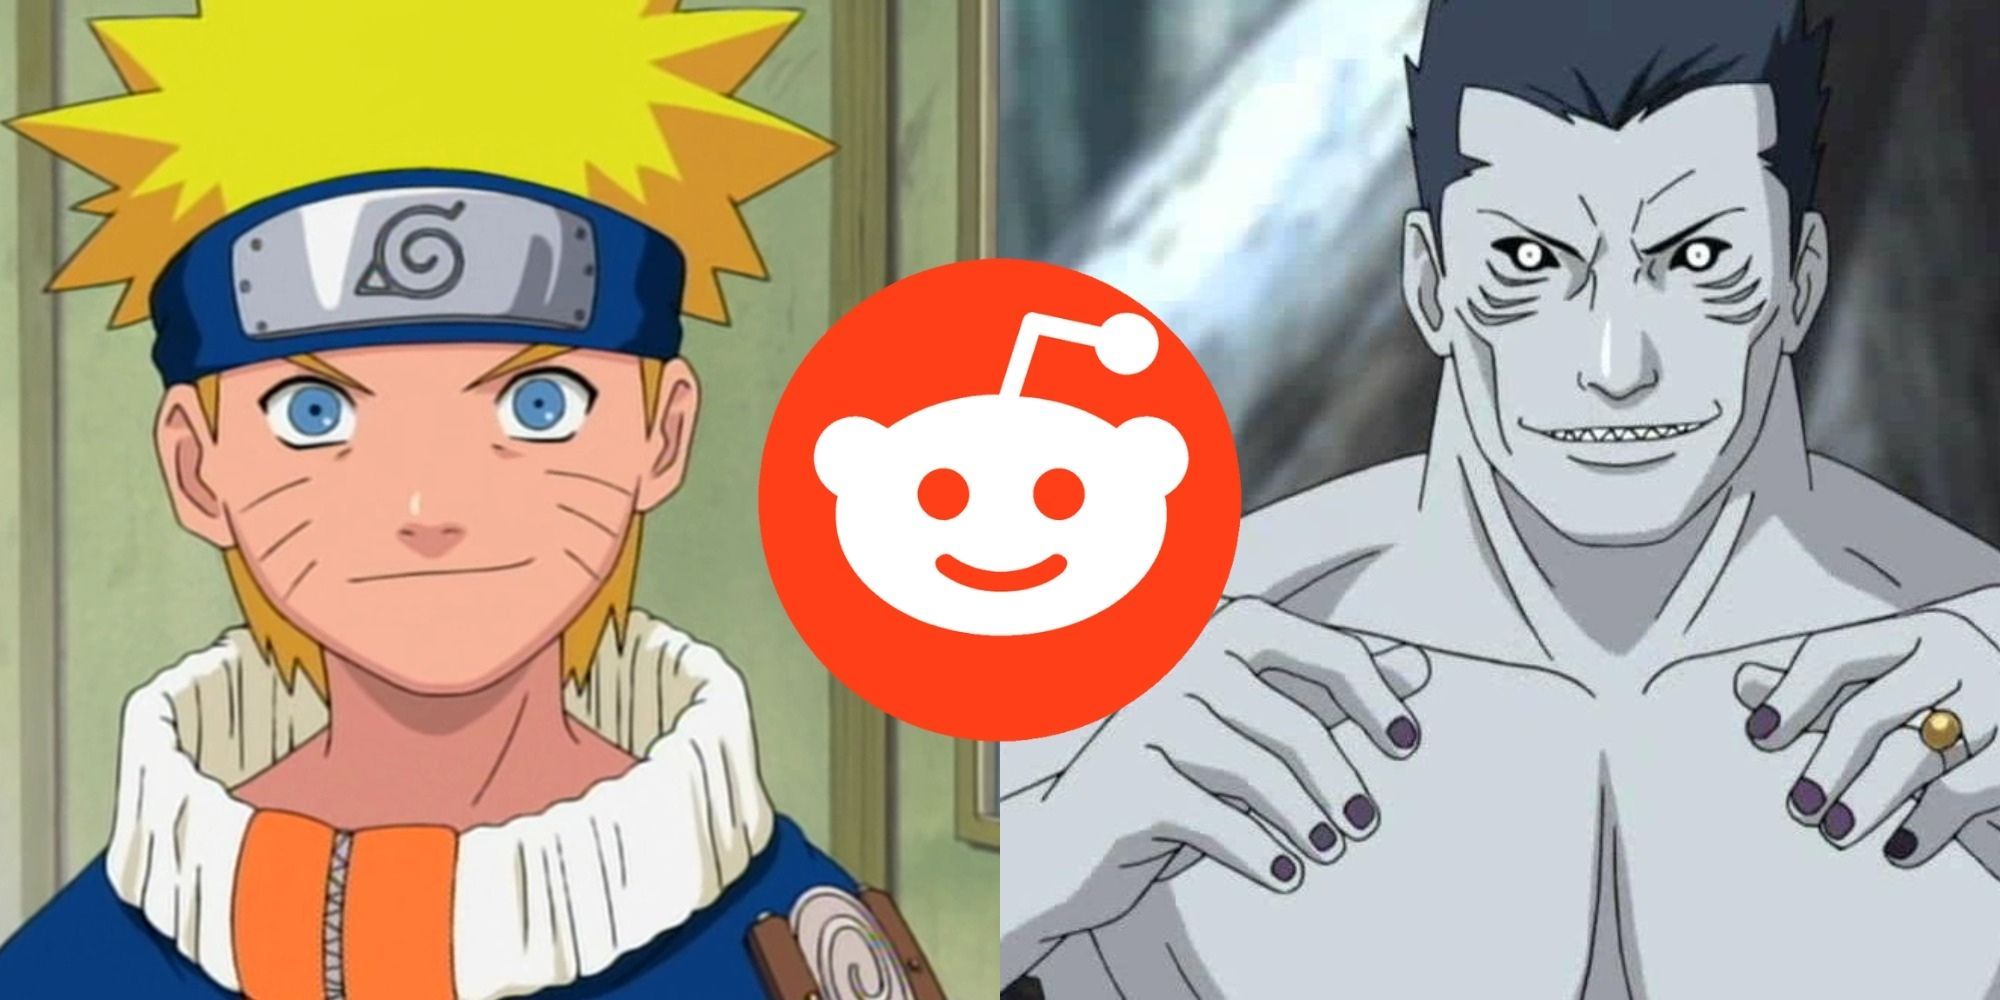 Naruto and Kisame side by side with the Reddit logo between them.